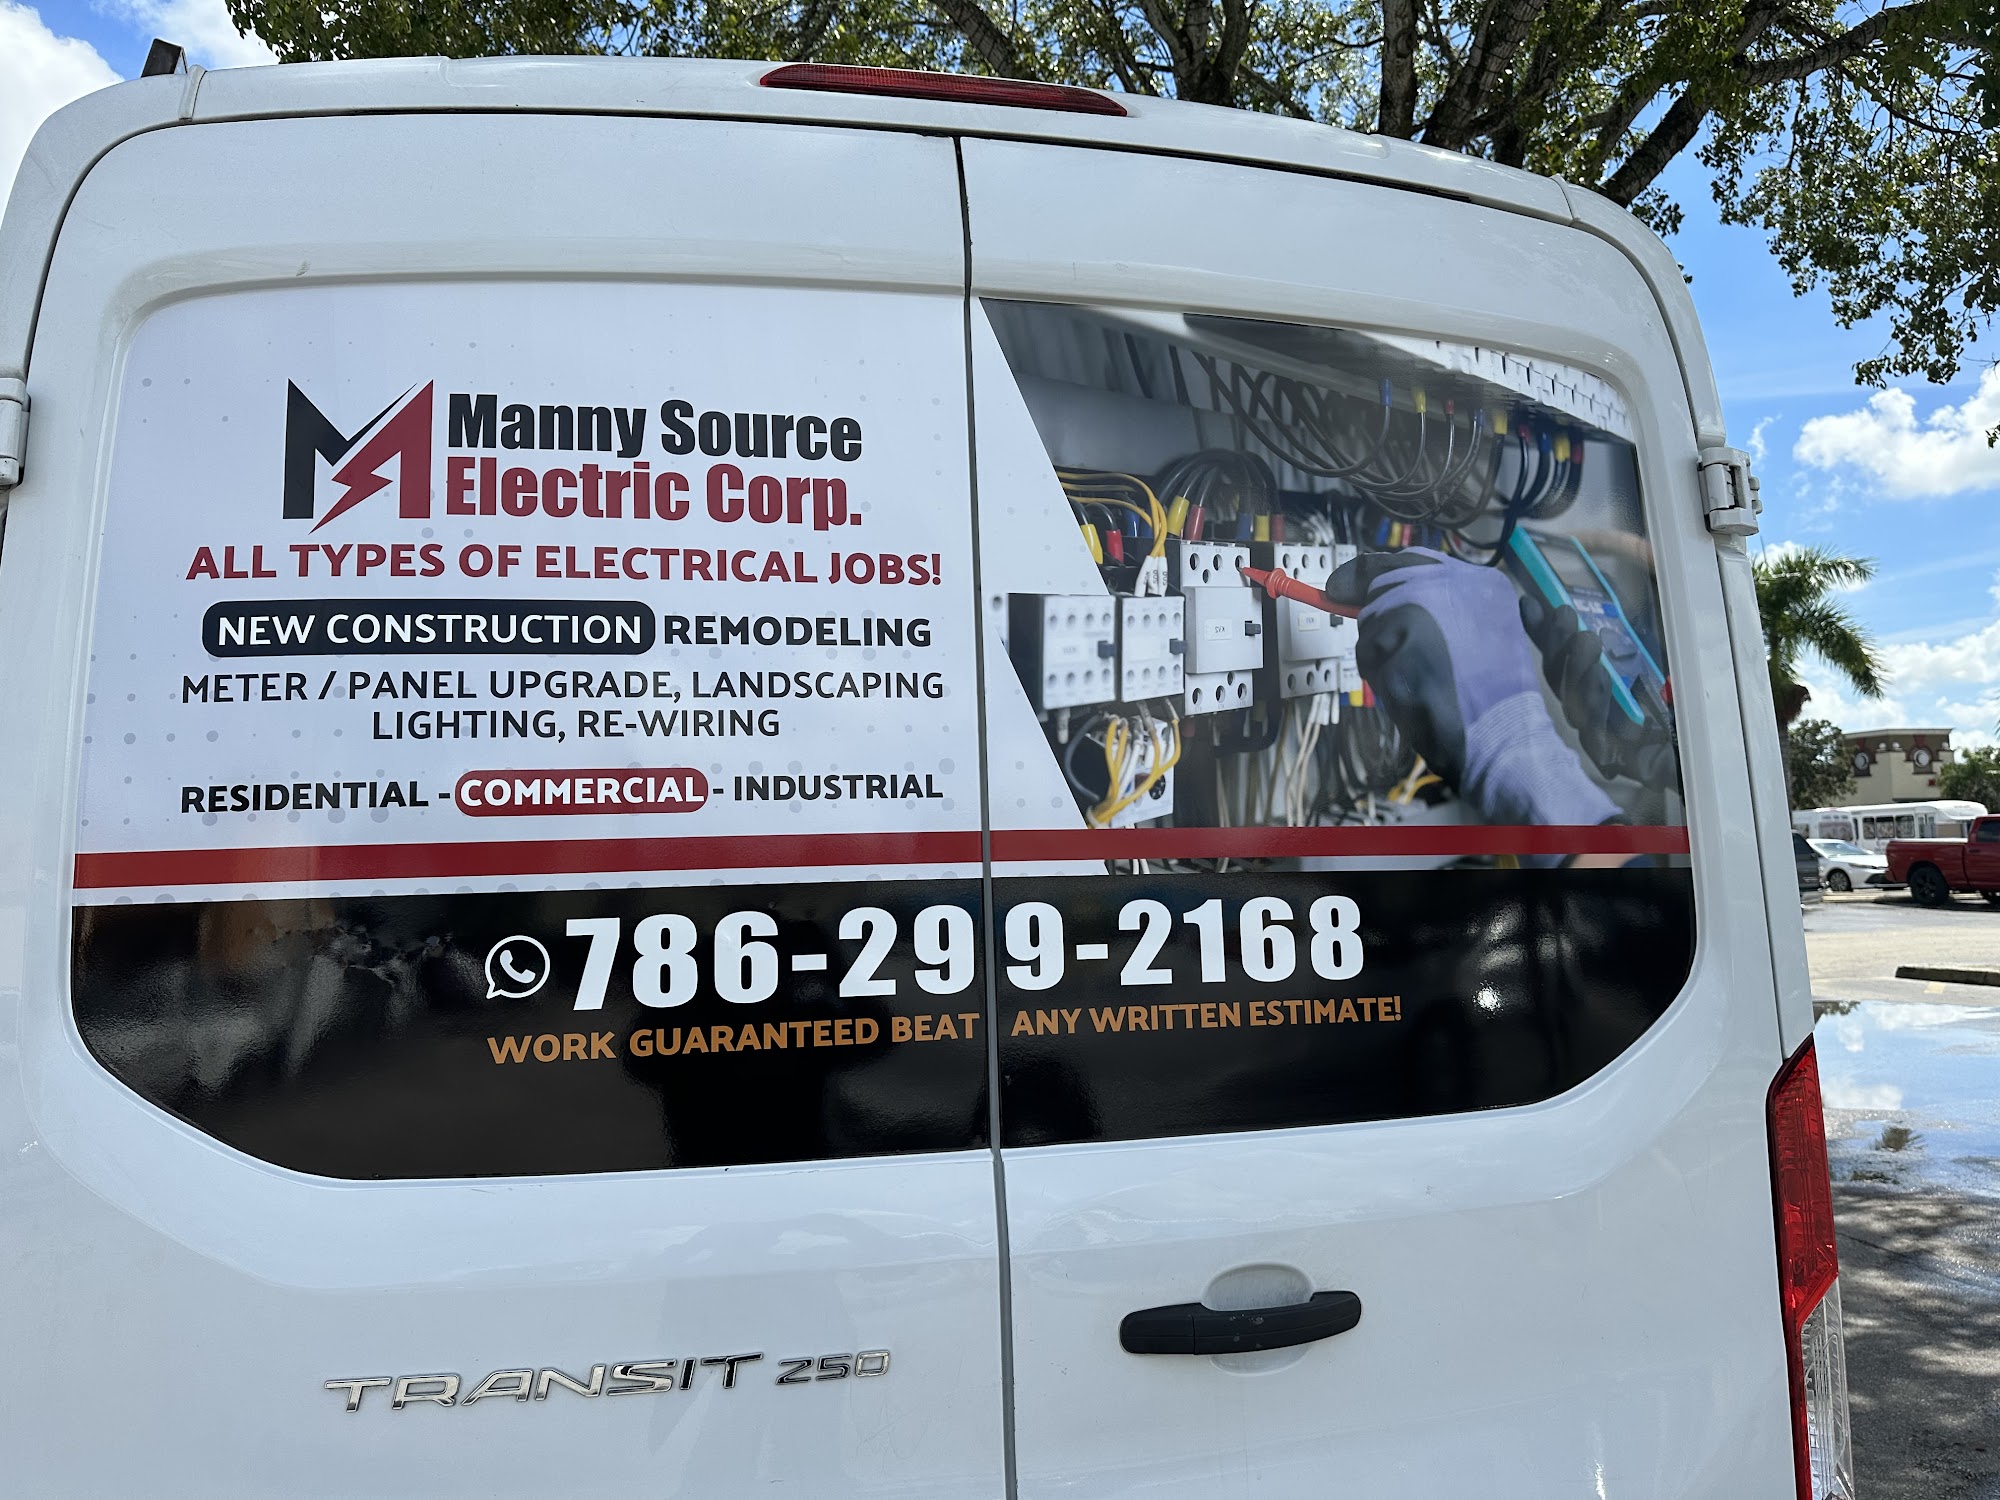 Manny Source Electric Corp